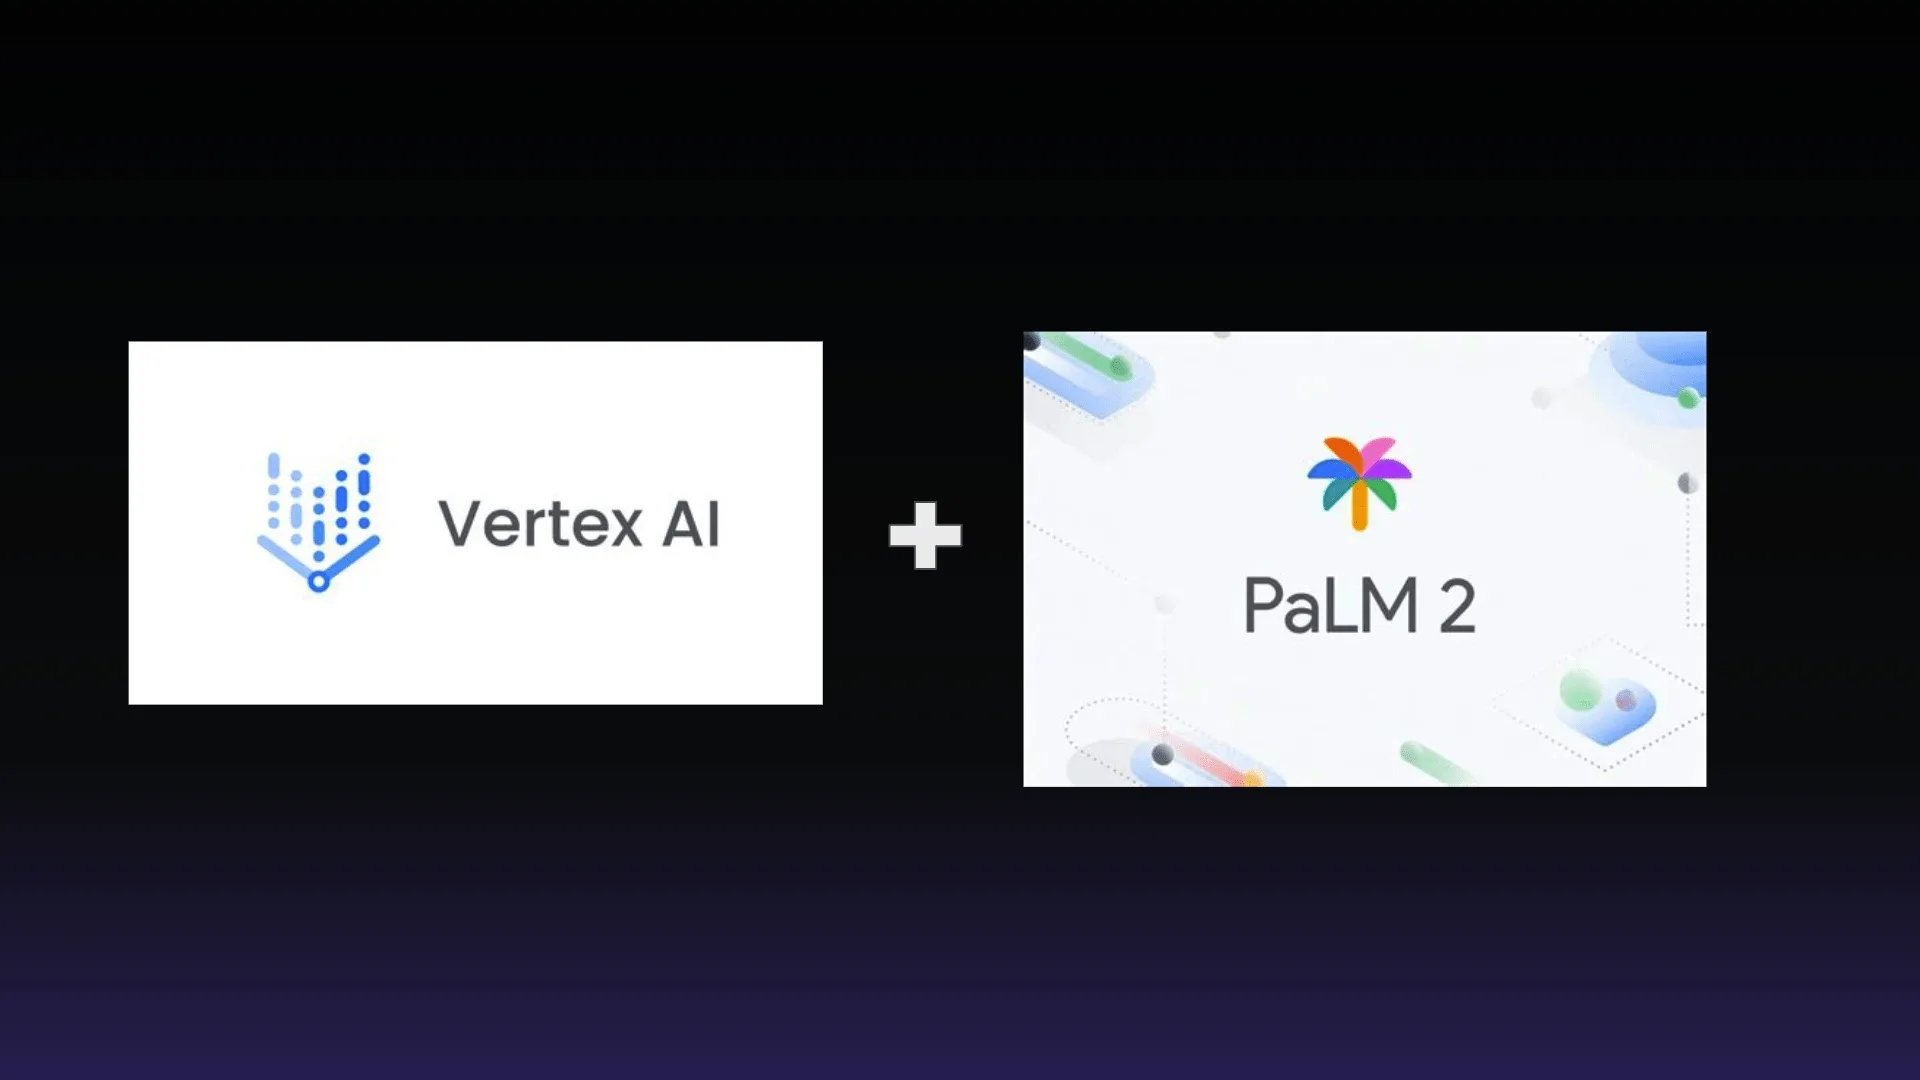 Logos of Google's Vertex AI and PaLM 2, which were used for the Bitmovin Analytics AI Session Interpreter